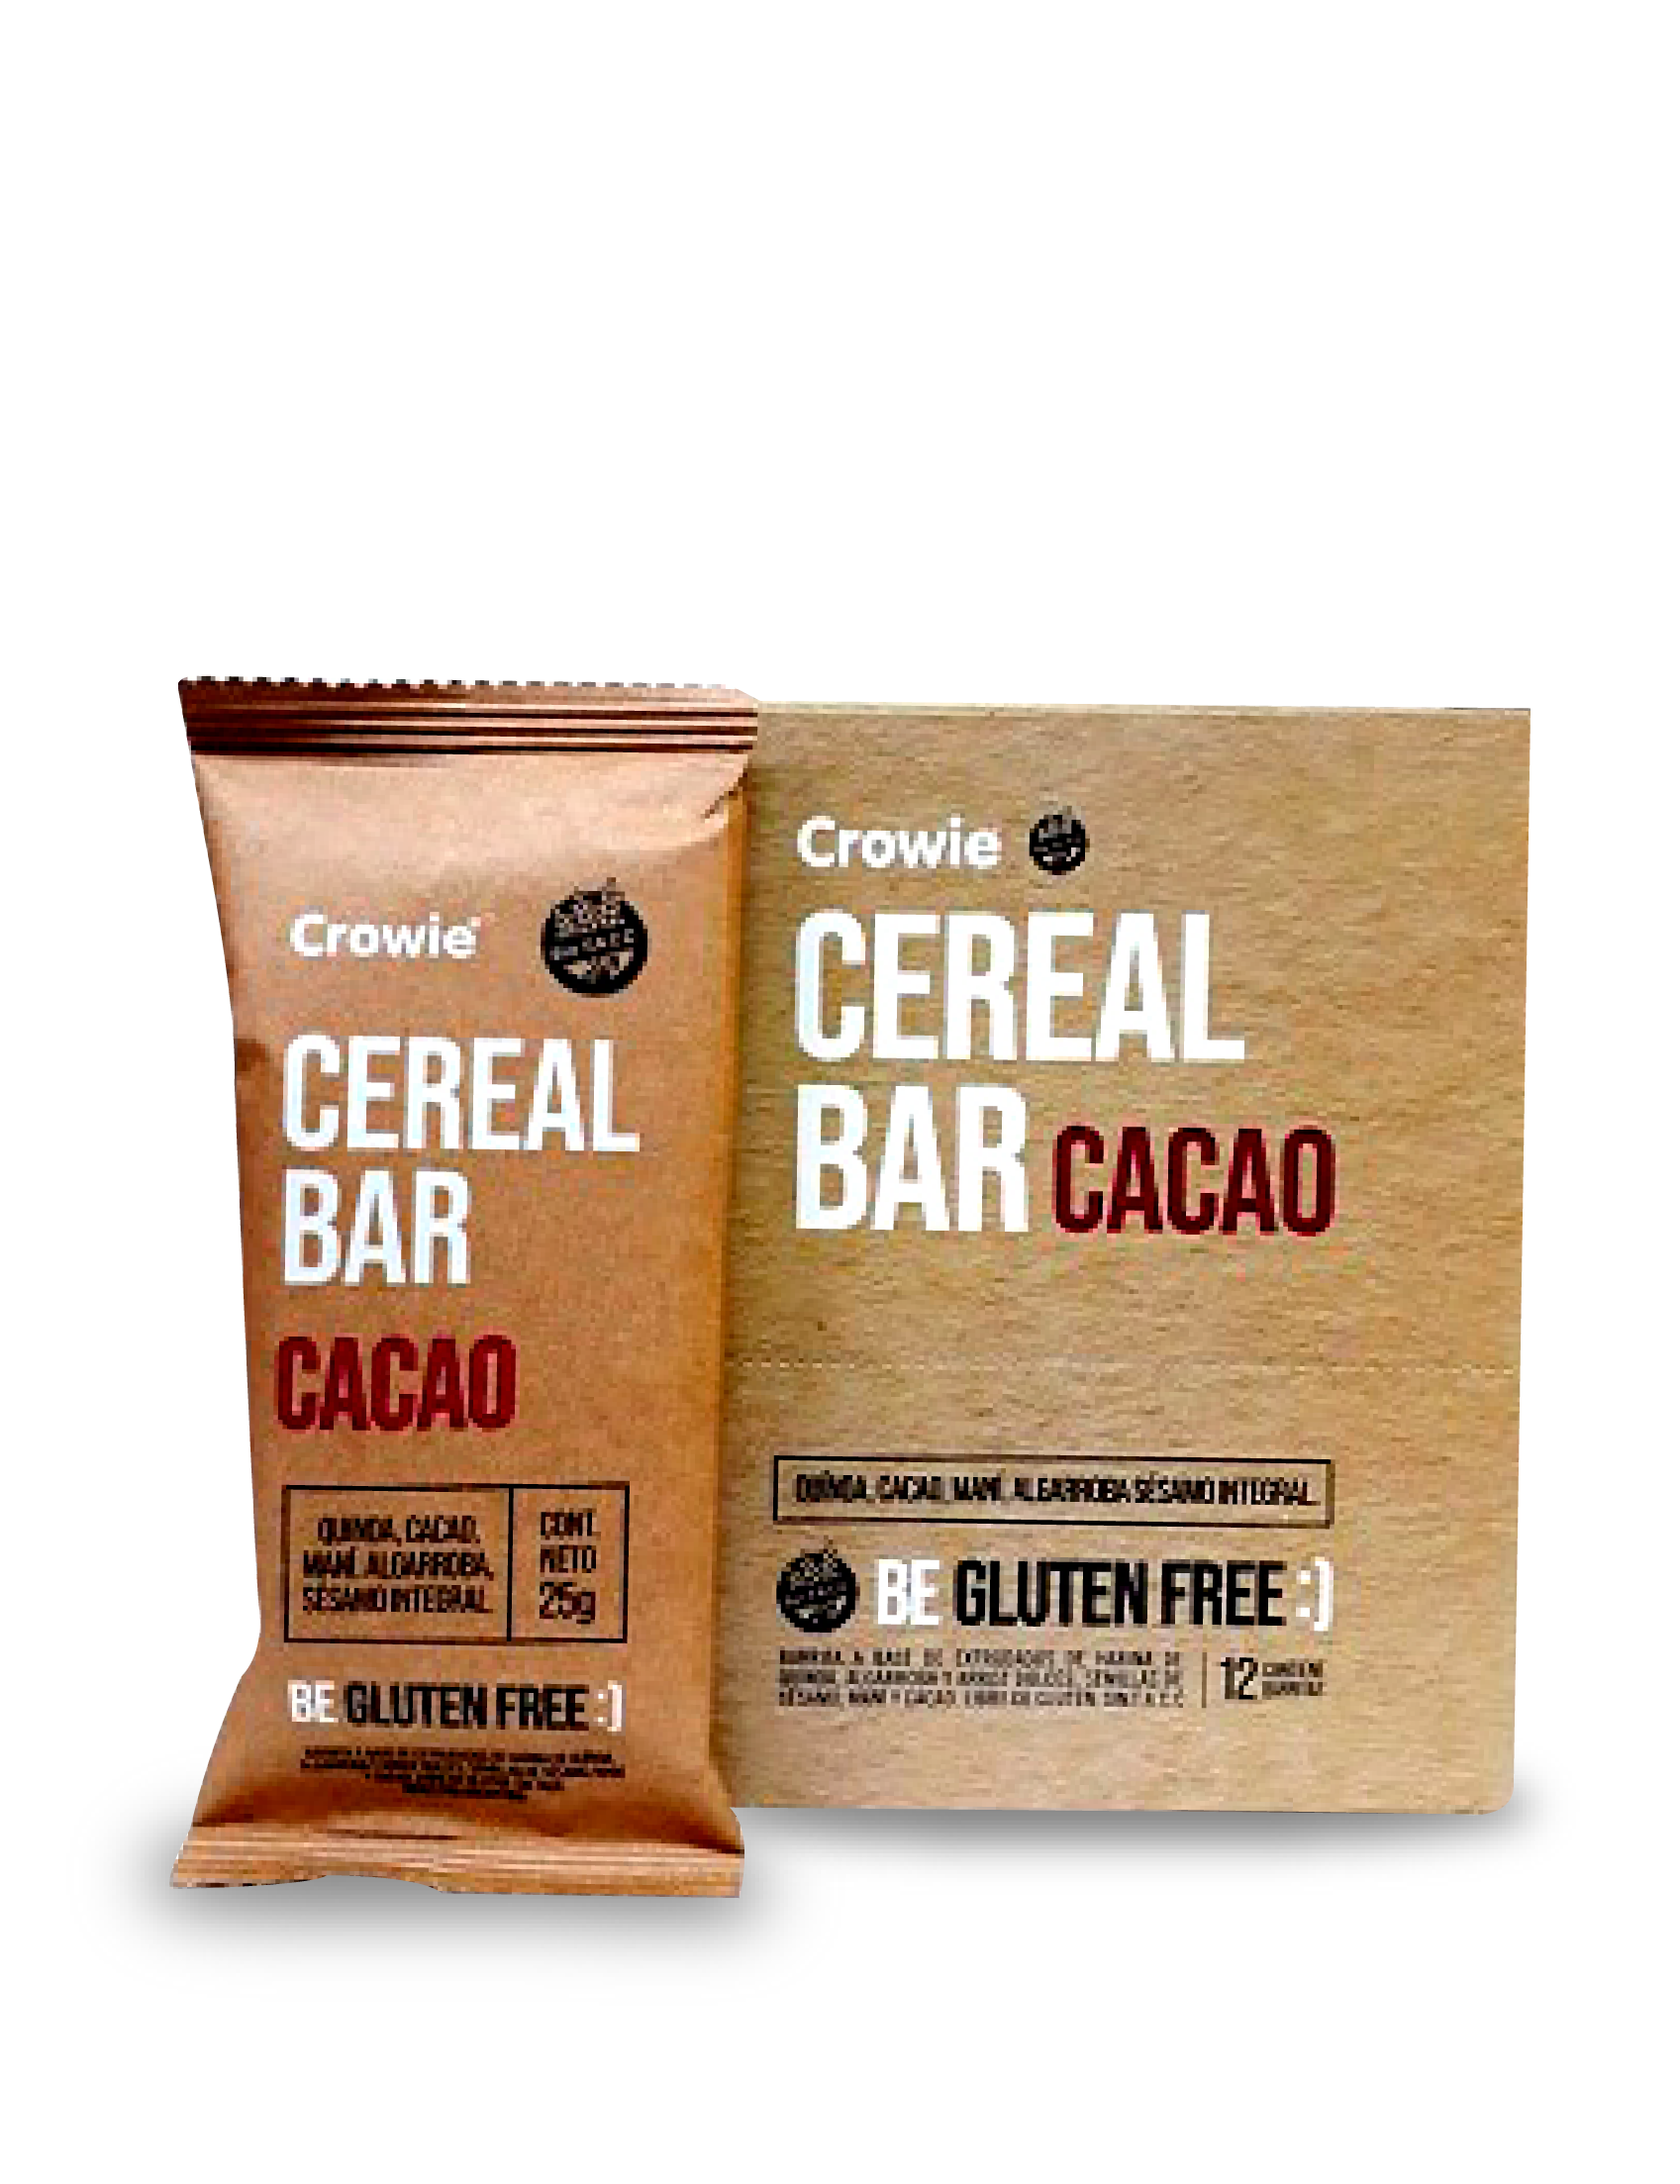 CROWIE -Cereal Bar Cacao x 12 unds  